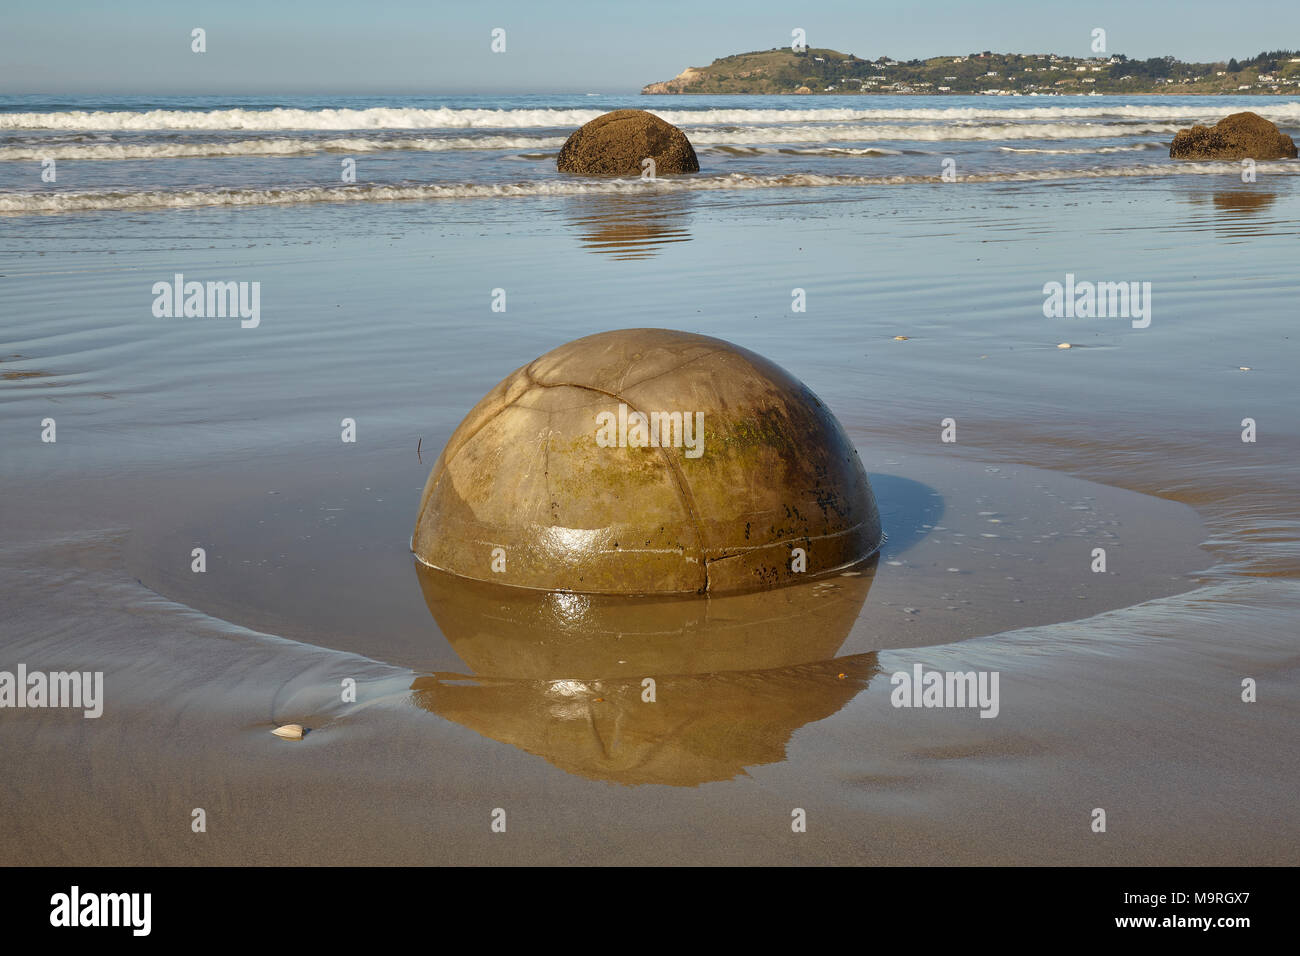 Close up of a Moeraki boulder half submerged shining in the sun with other boulders in the background and the tide out, New Zealand, South Island, NZ Stock Photo